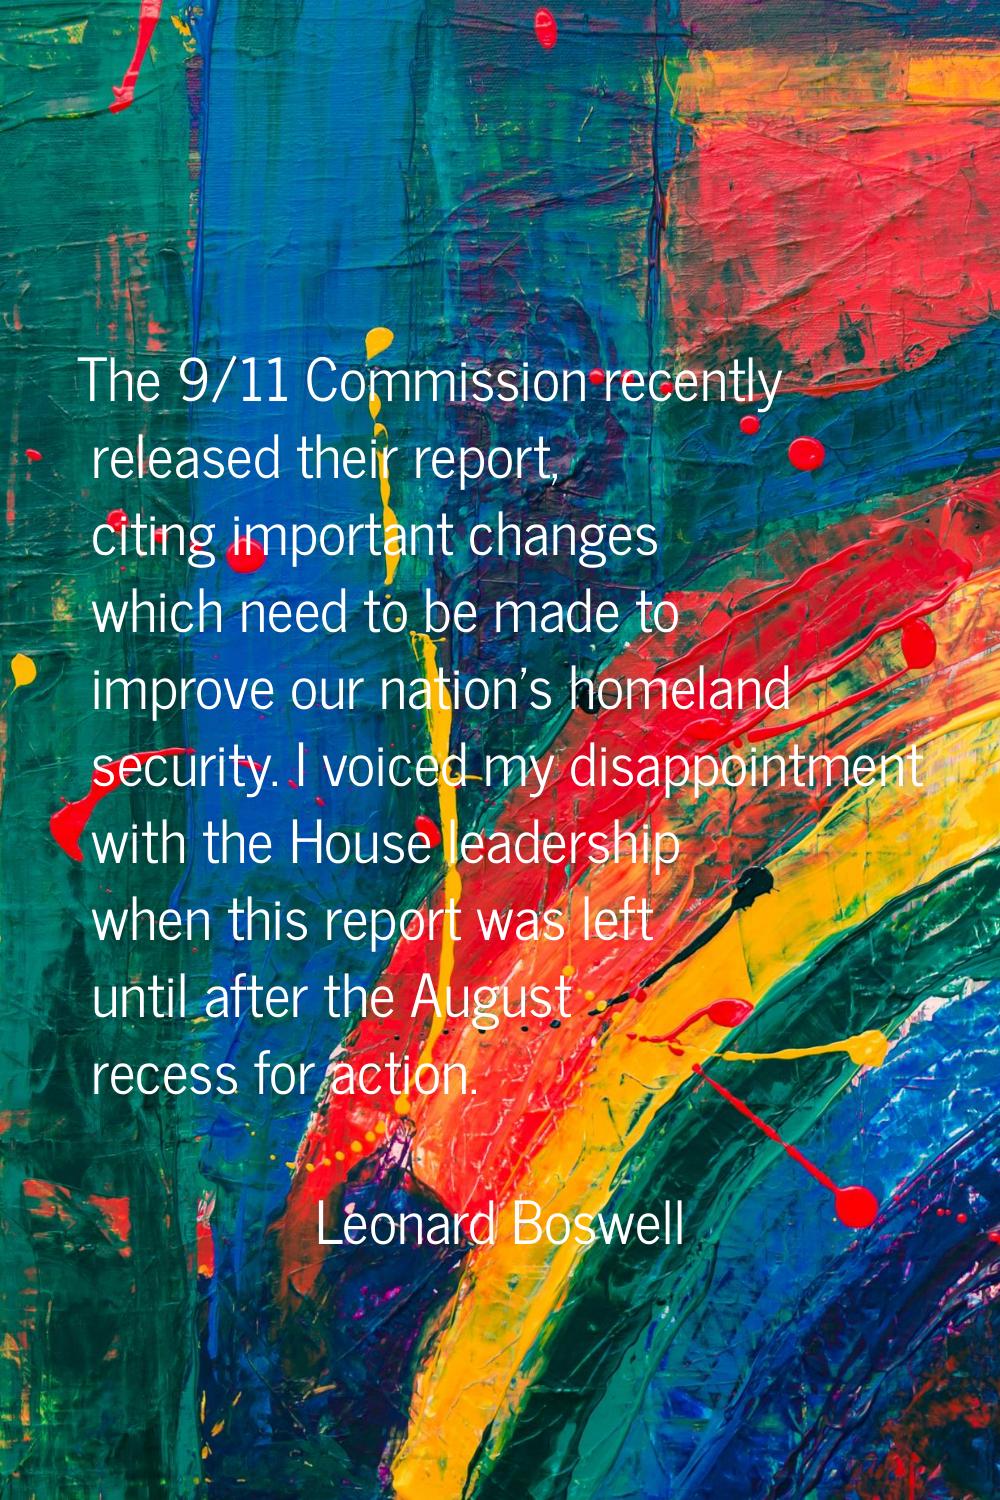 The 9/11 Commission recently released their report, citing important changes which need to be made 